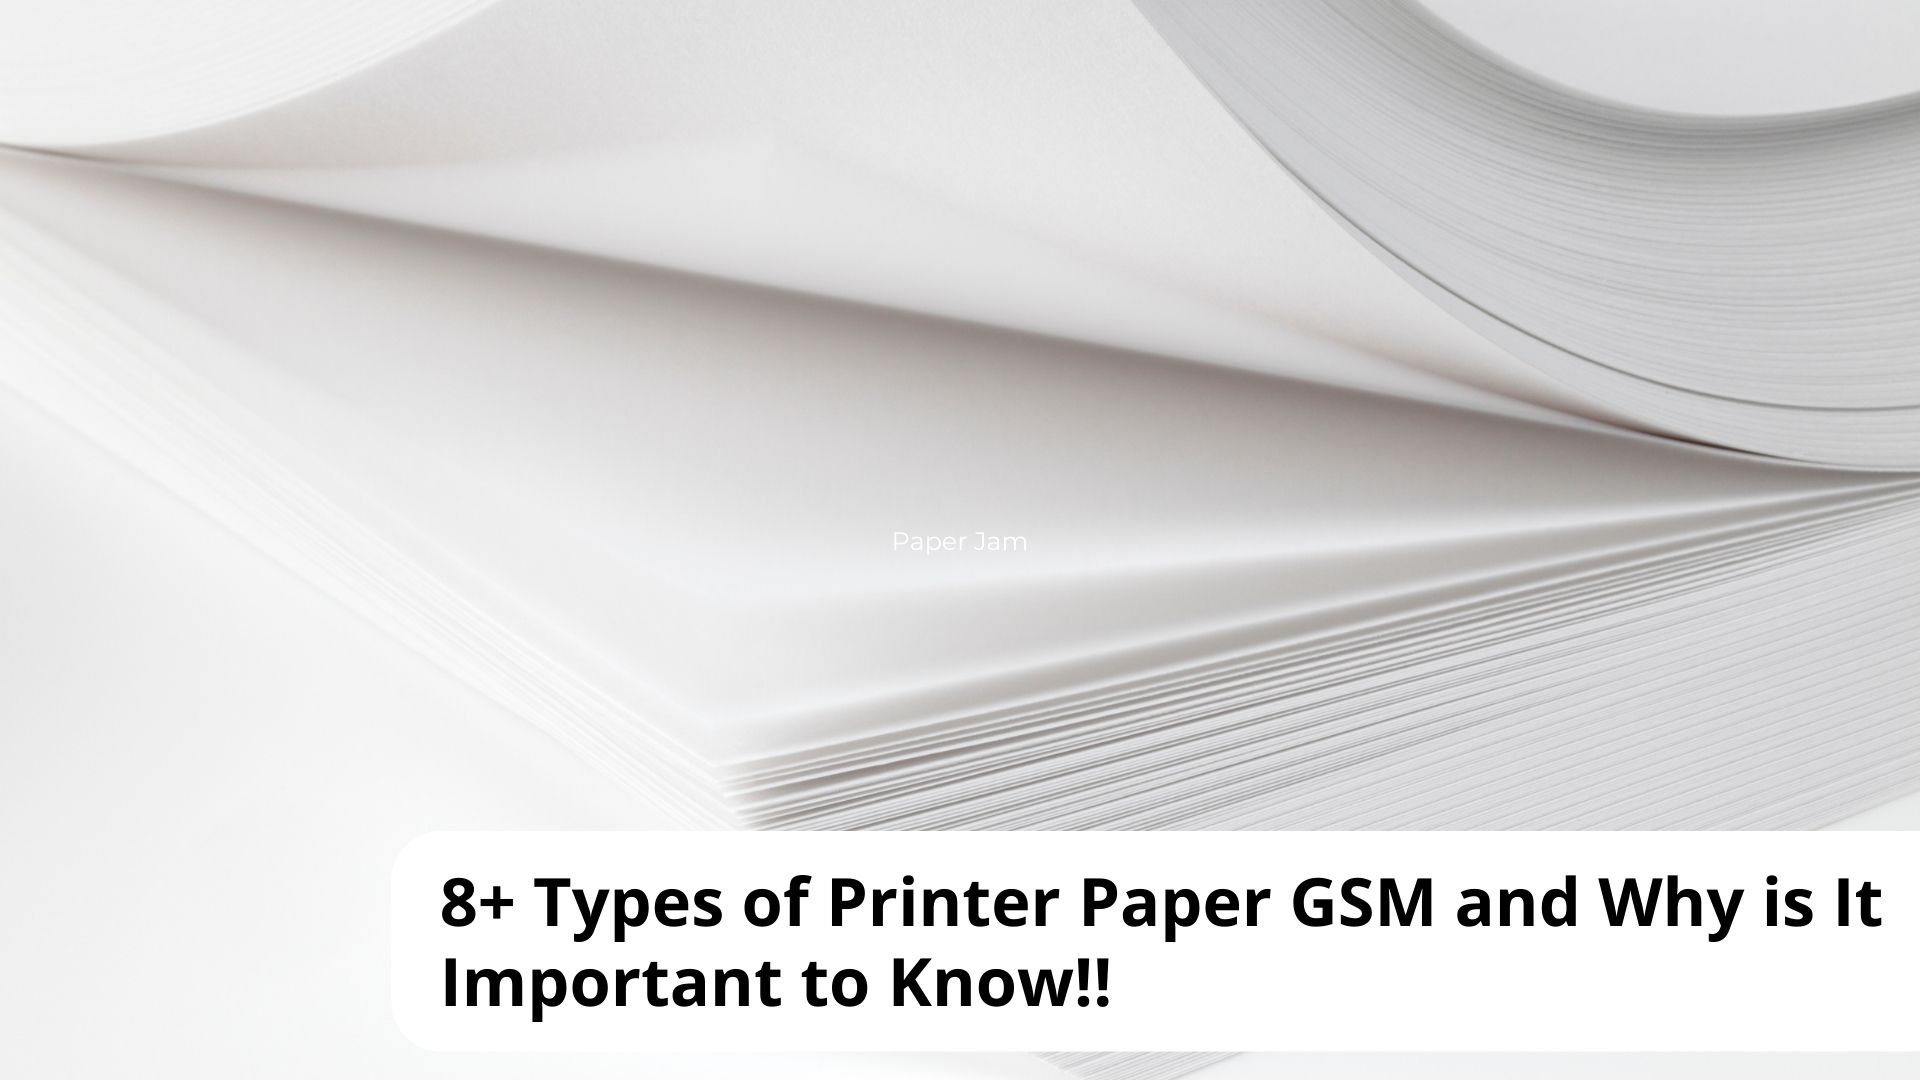 8+ Types of Printer Paper GSM and Why is It Important to Know!!